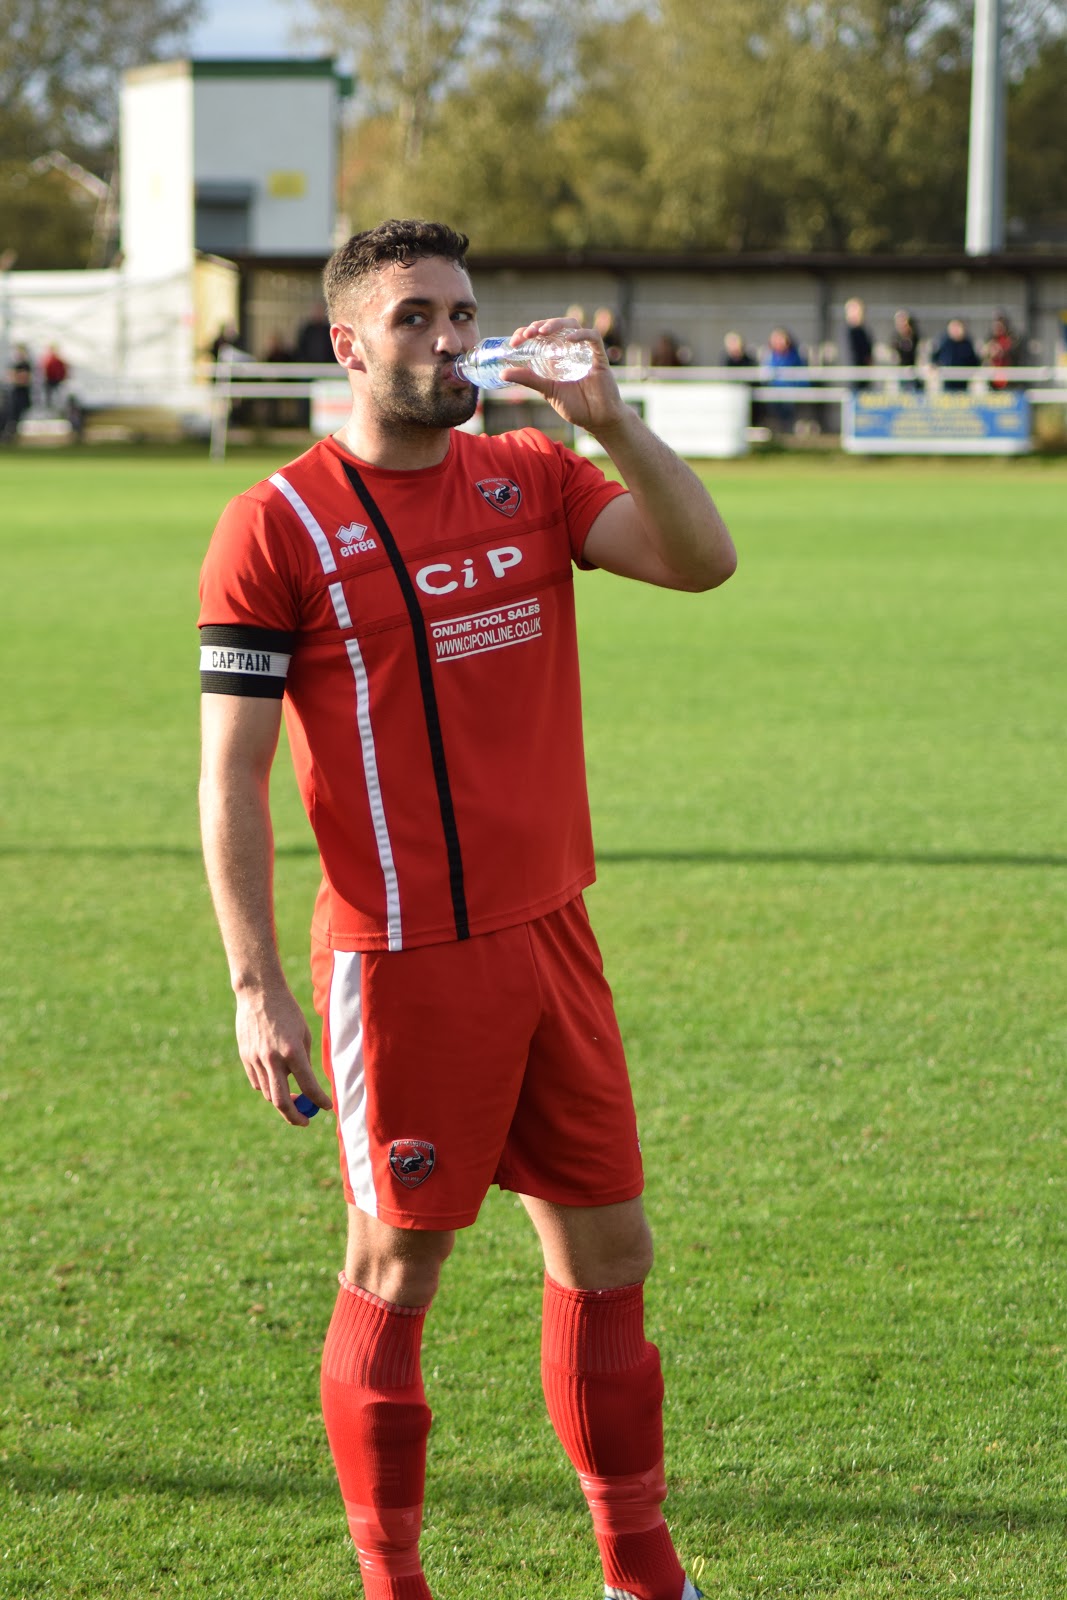 AFC MANSFIELD (Archived): AFC Mansfield 1-5 Liversedge FC